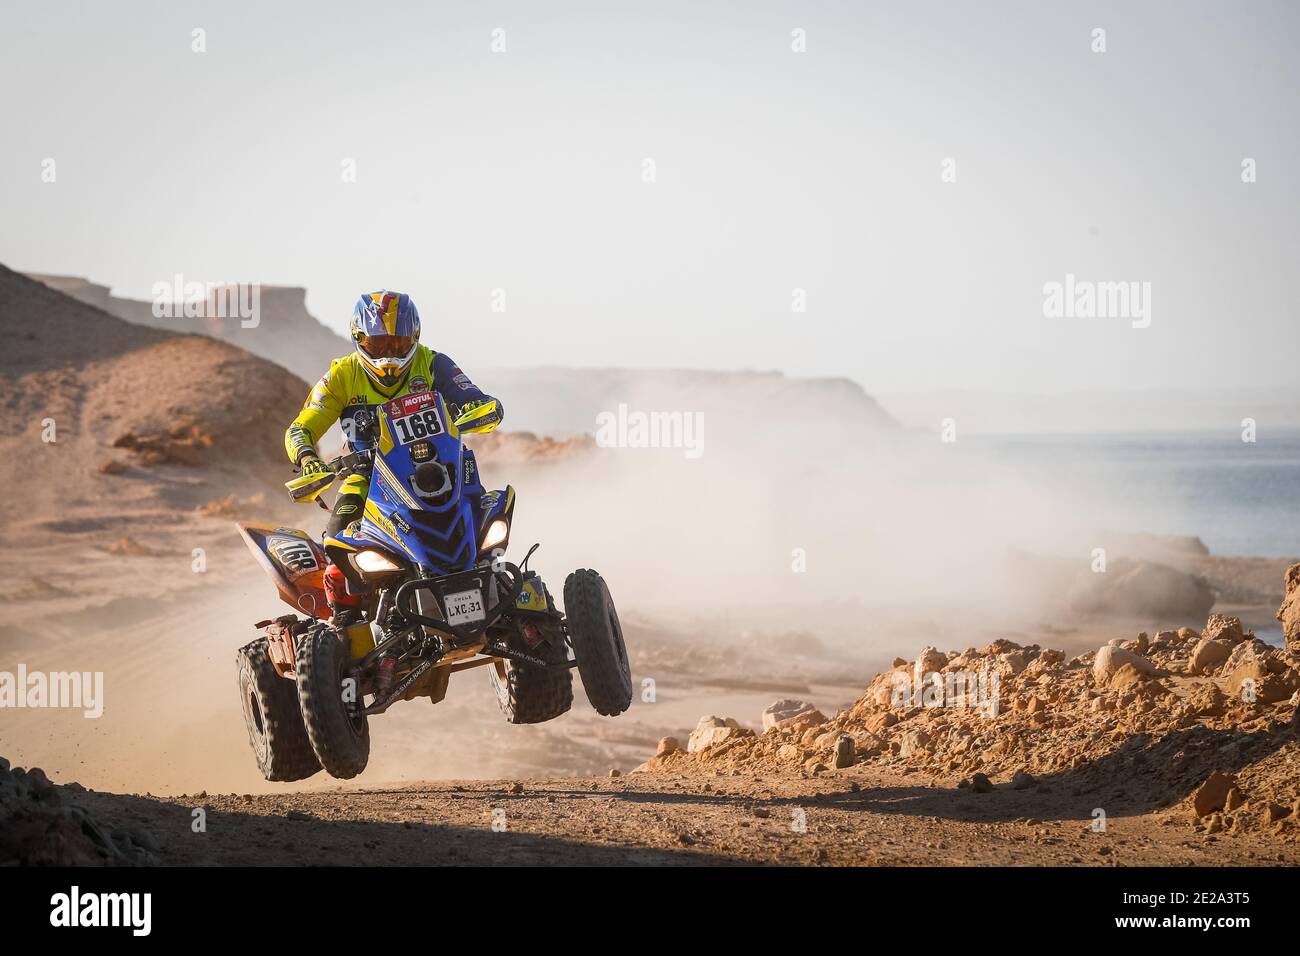 168 Pedemonte Italo (chl), Yamaha, Enrico Racing Team, Quad, action during the 9th stage of the Dakar 2021 between Neom and N / LM Stock Photo